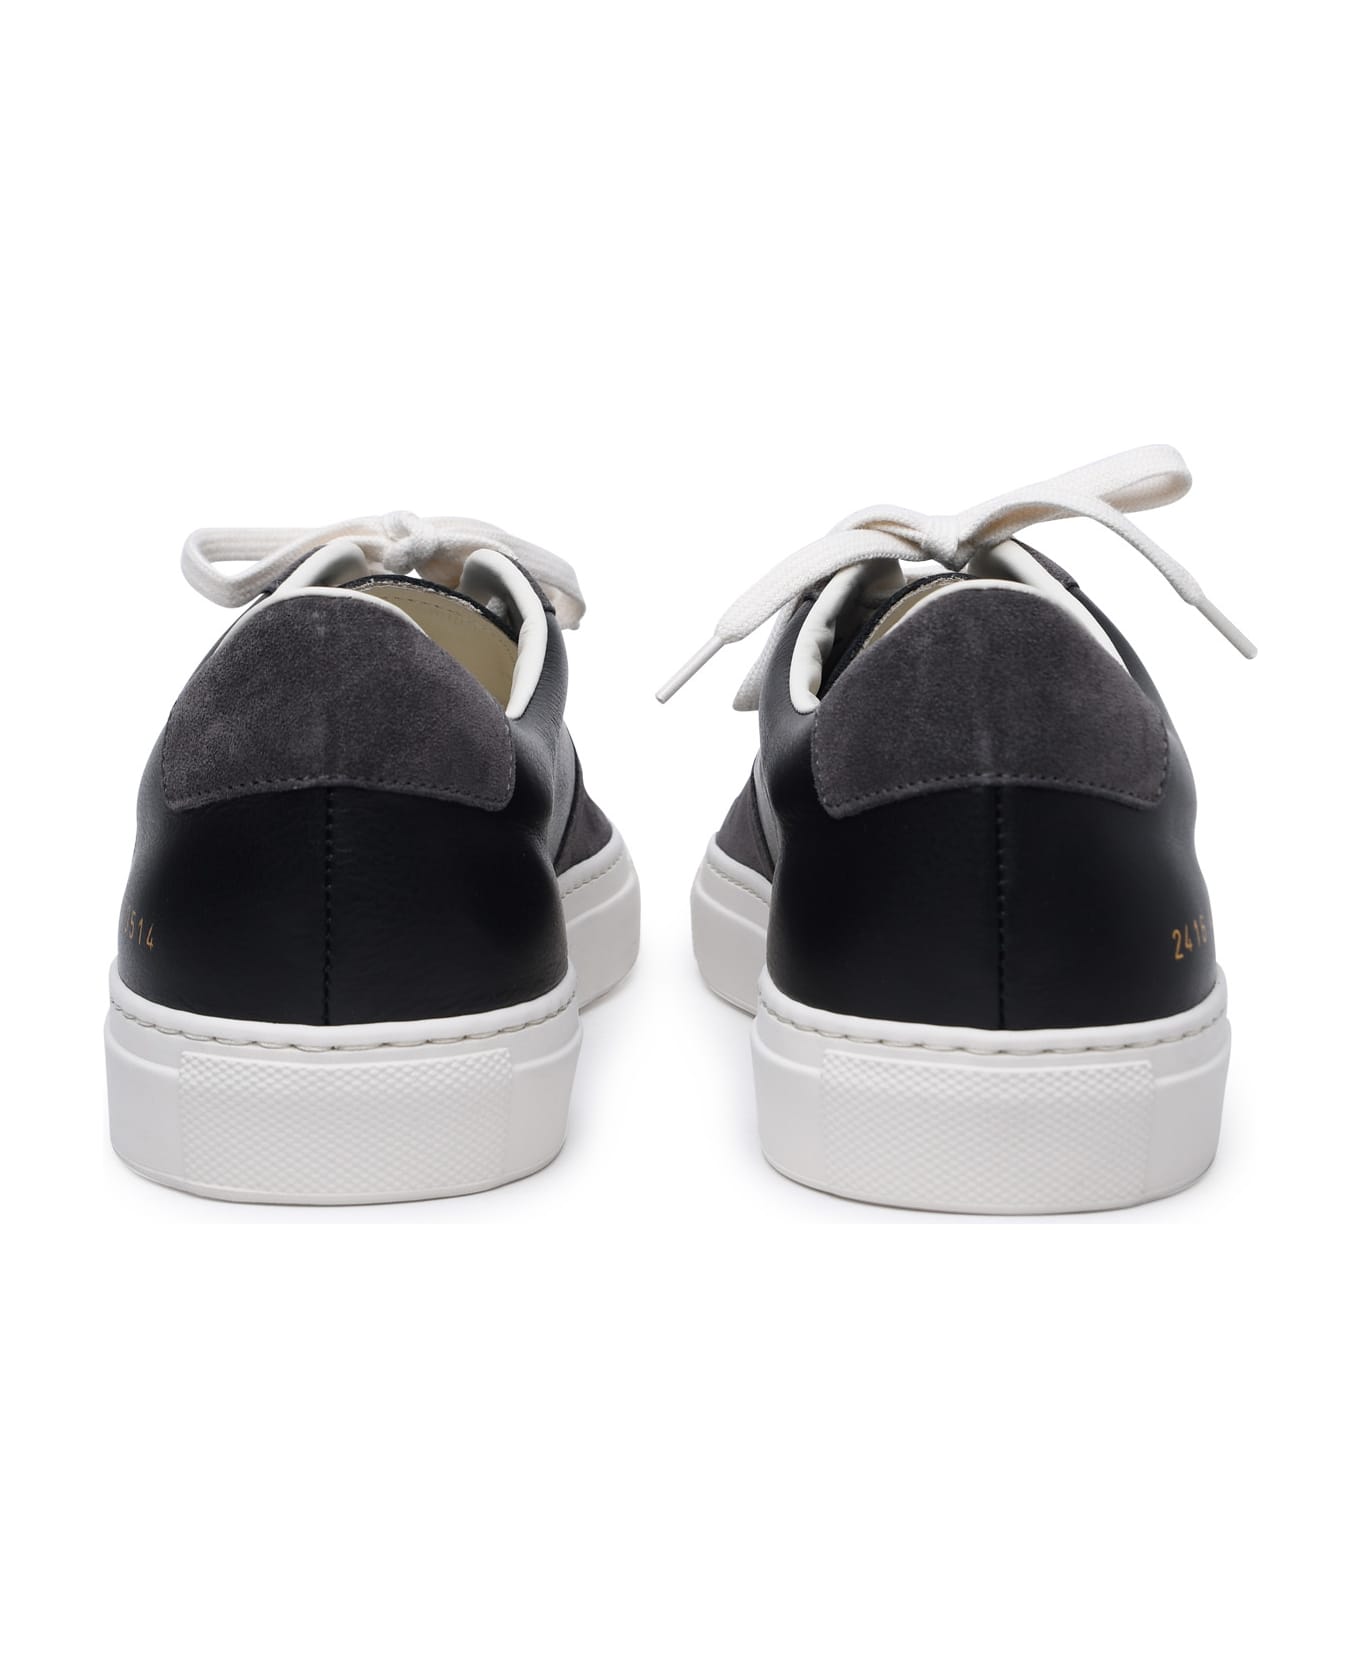 Common Projects 'bball Duo' Black Leather Sneakers - Black